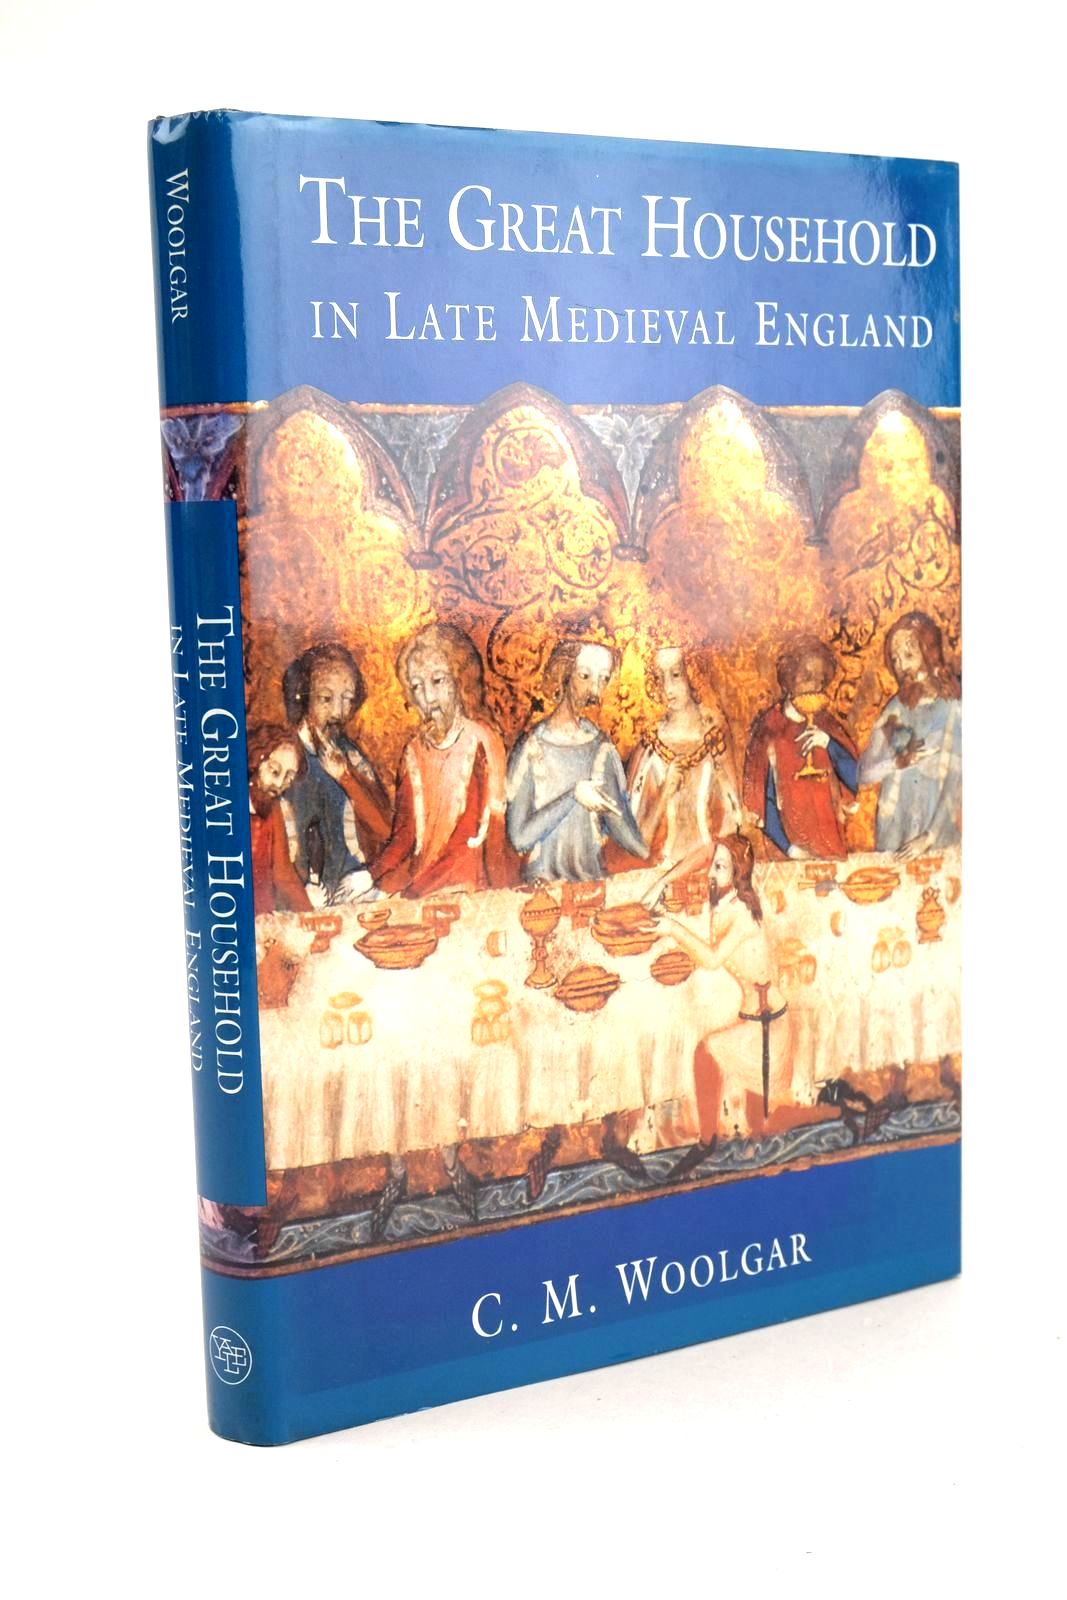 Photo of THE GREAT HOUSEHOLD IN LATE MEDIEVAL ENGLAND written by Woolgar, C.M. published by Yale University Press (STOCK CODE: 1326182)  for sale by Stella & Rose's Books